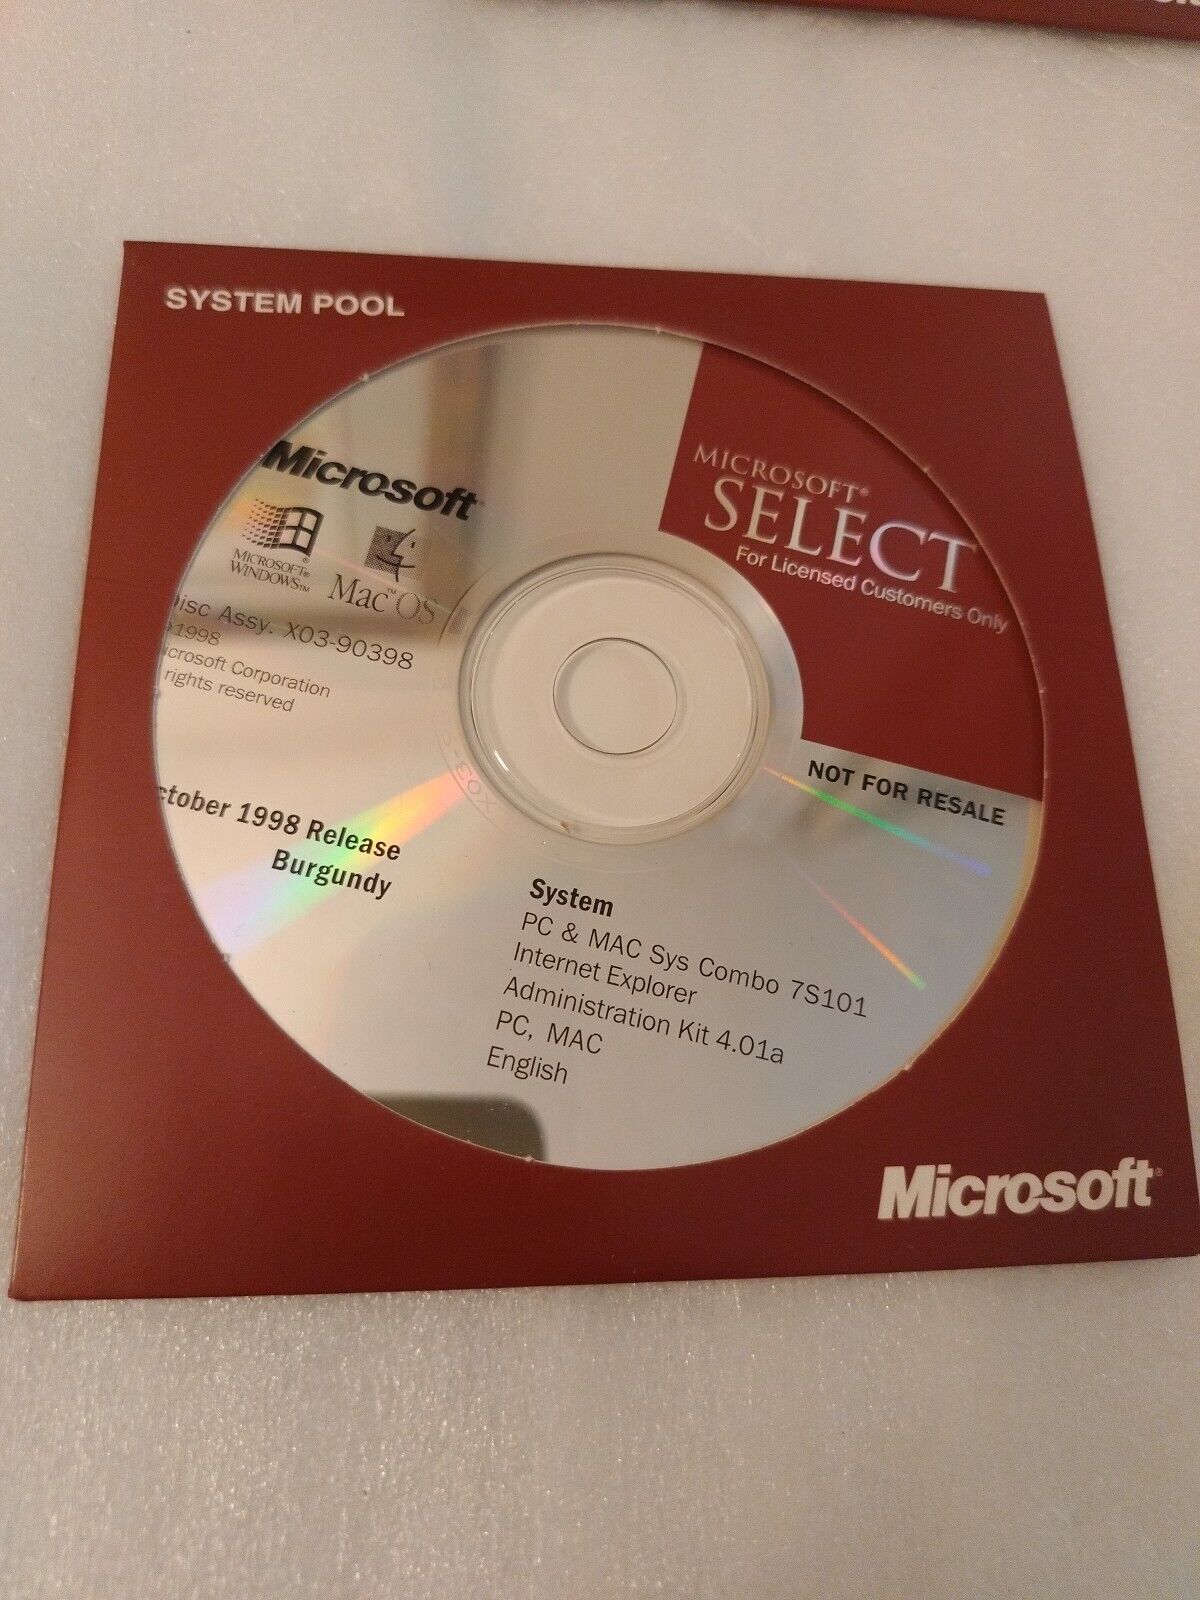 Microsoft Select System Pool (Burgundy) October 1998 Release/System